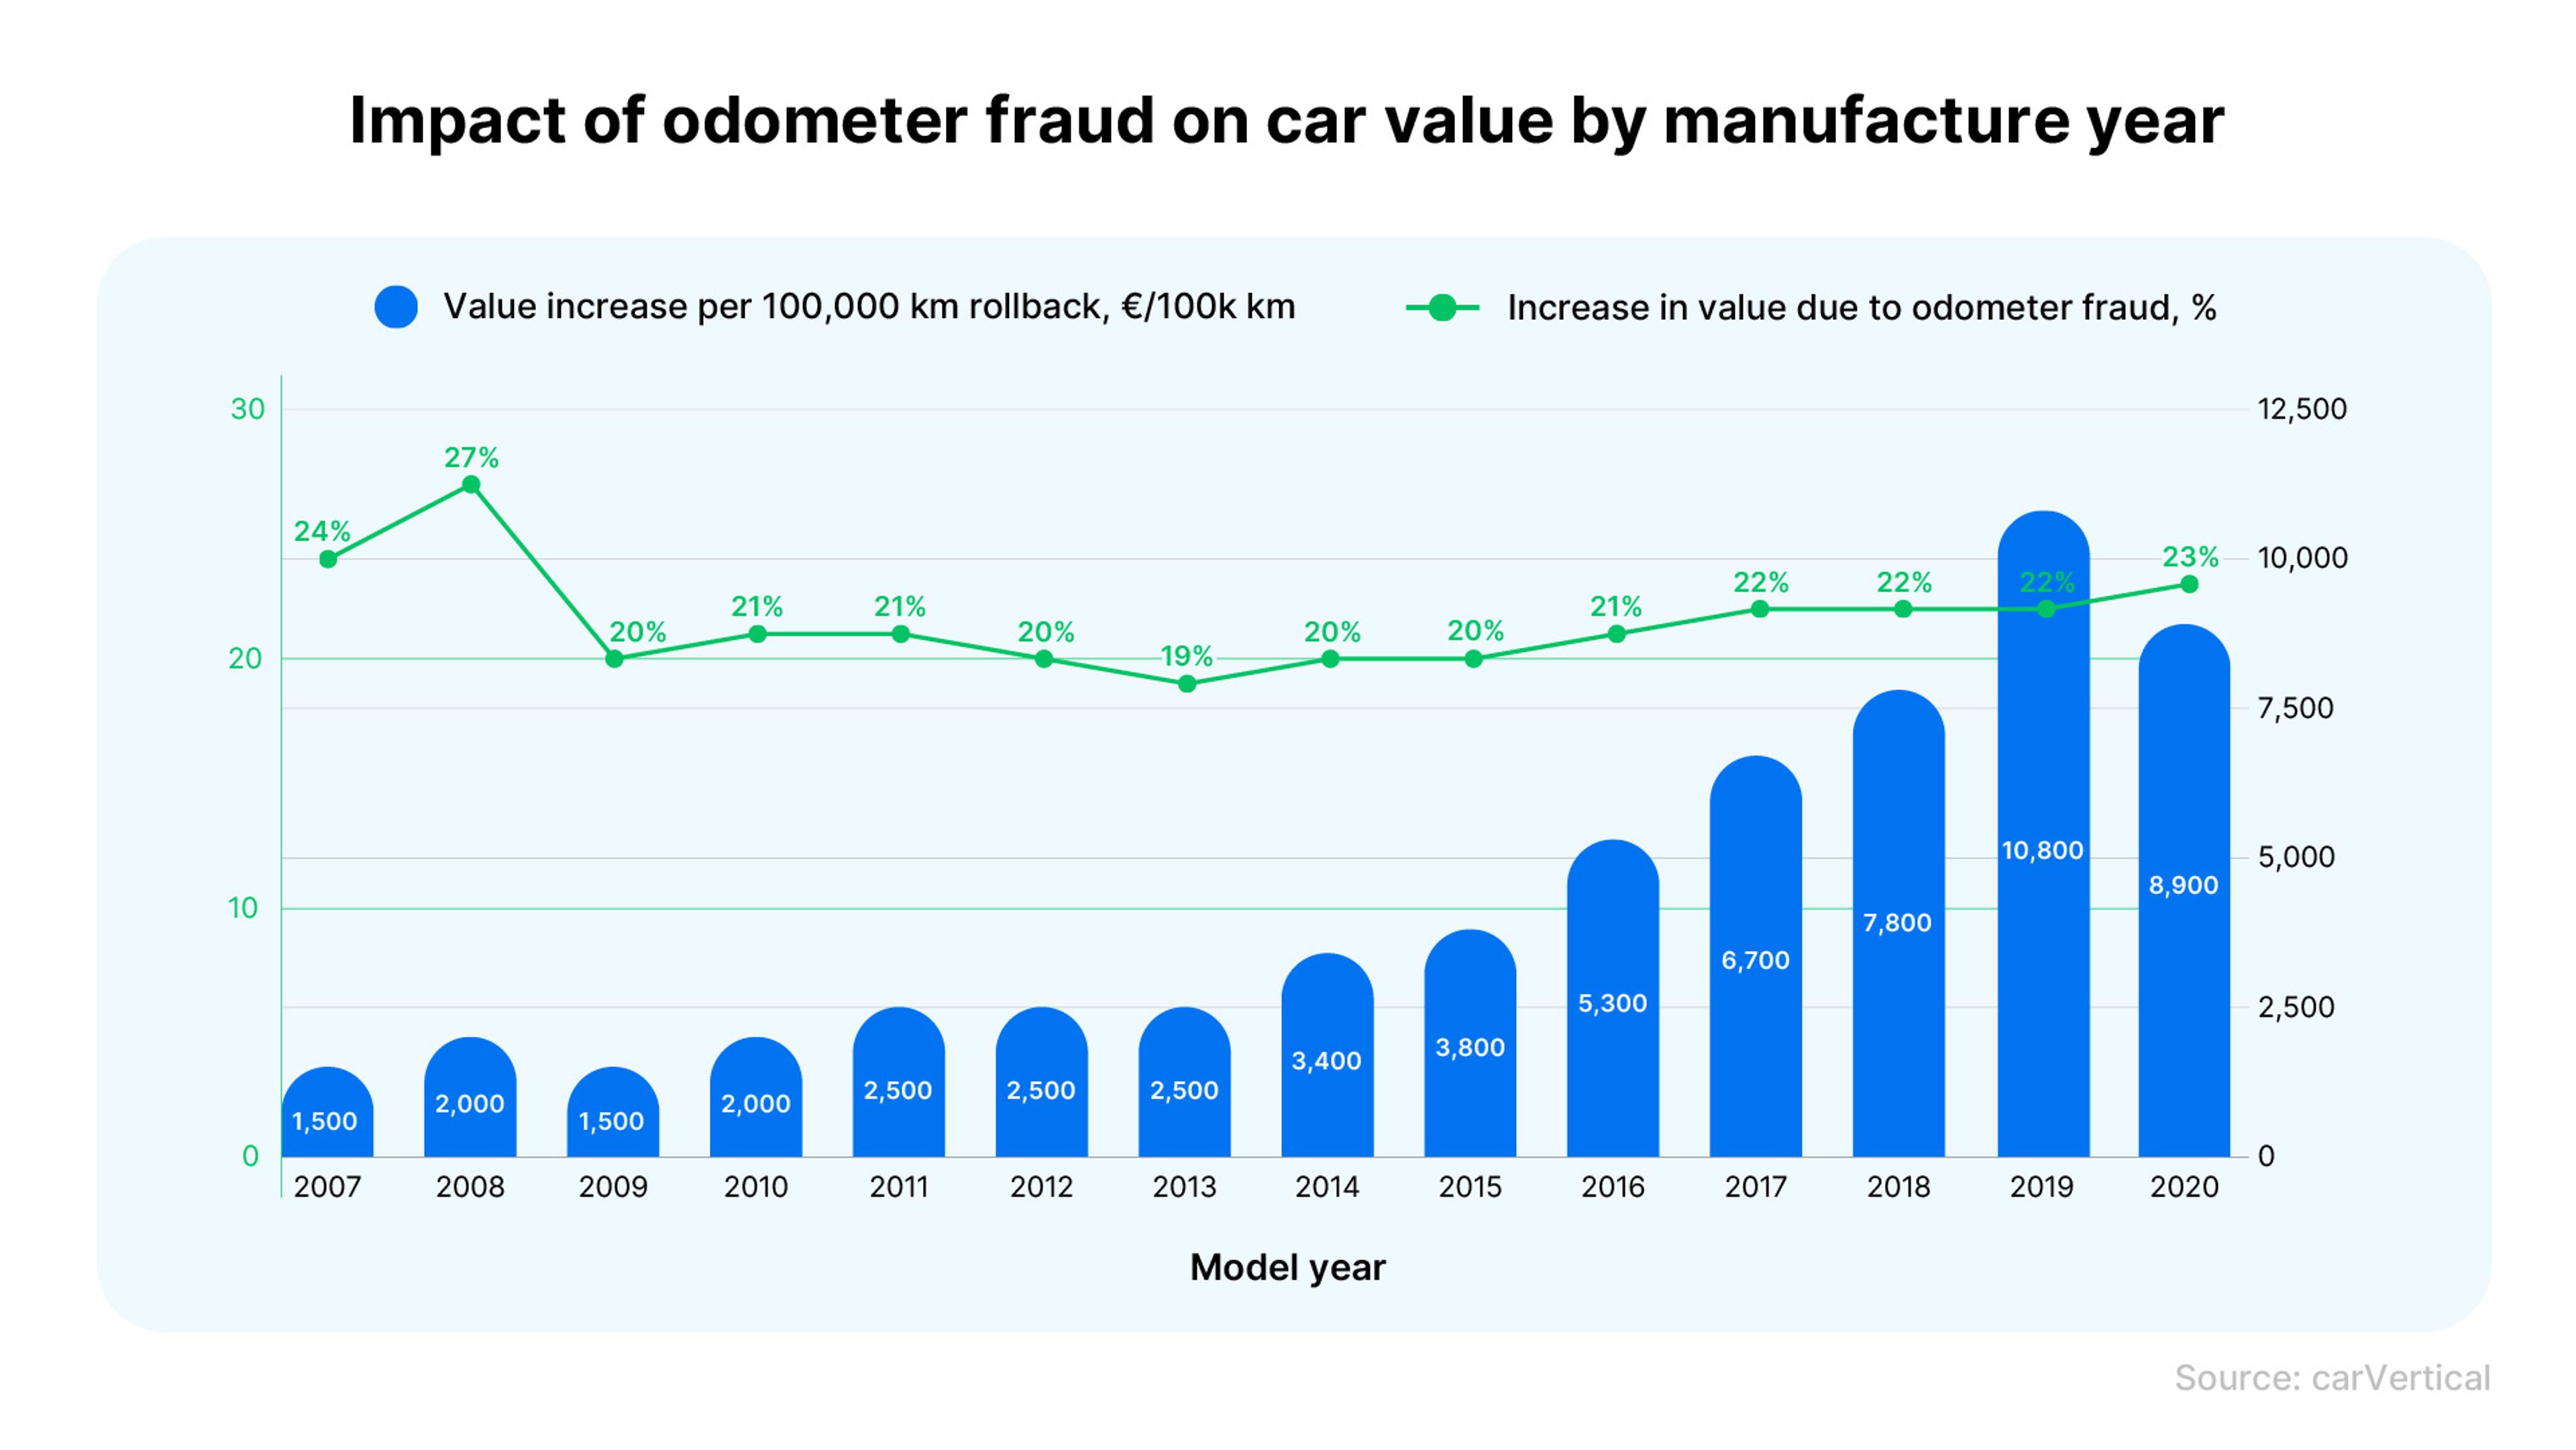 Impact of odometer fraud on car value by manufacture year